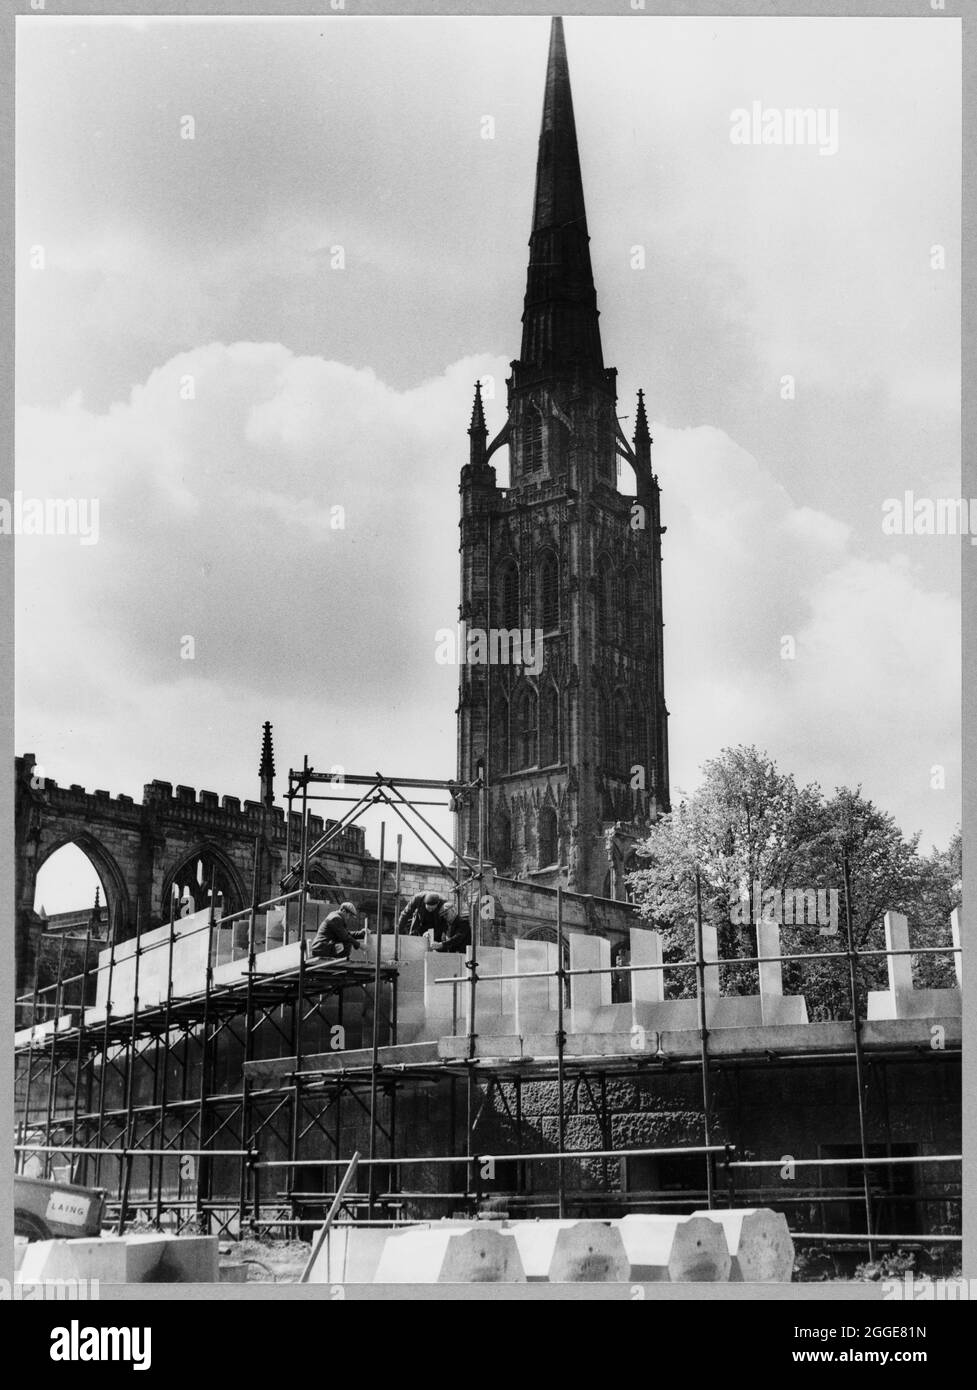 A view towards three builders working on a section of the baptistery window at Coventry Cathedral, showing some of the stones belonging to the window in the foreground and in the background the tower of the old cathedral. This image was catalogued as part of the Breaking New Ground Project in partnership with the John Laing Charitable Trust in 2019-20. Stock Photo